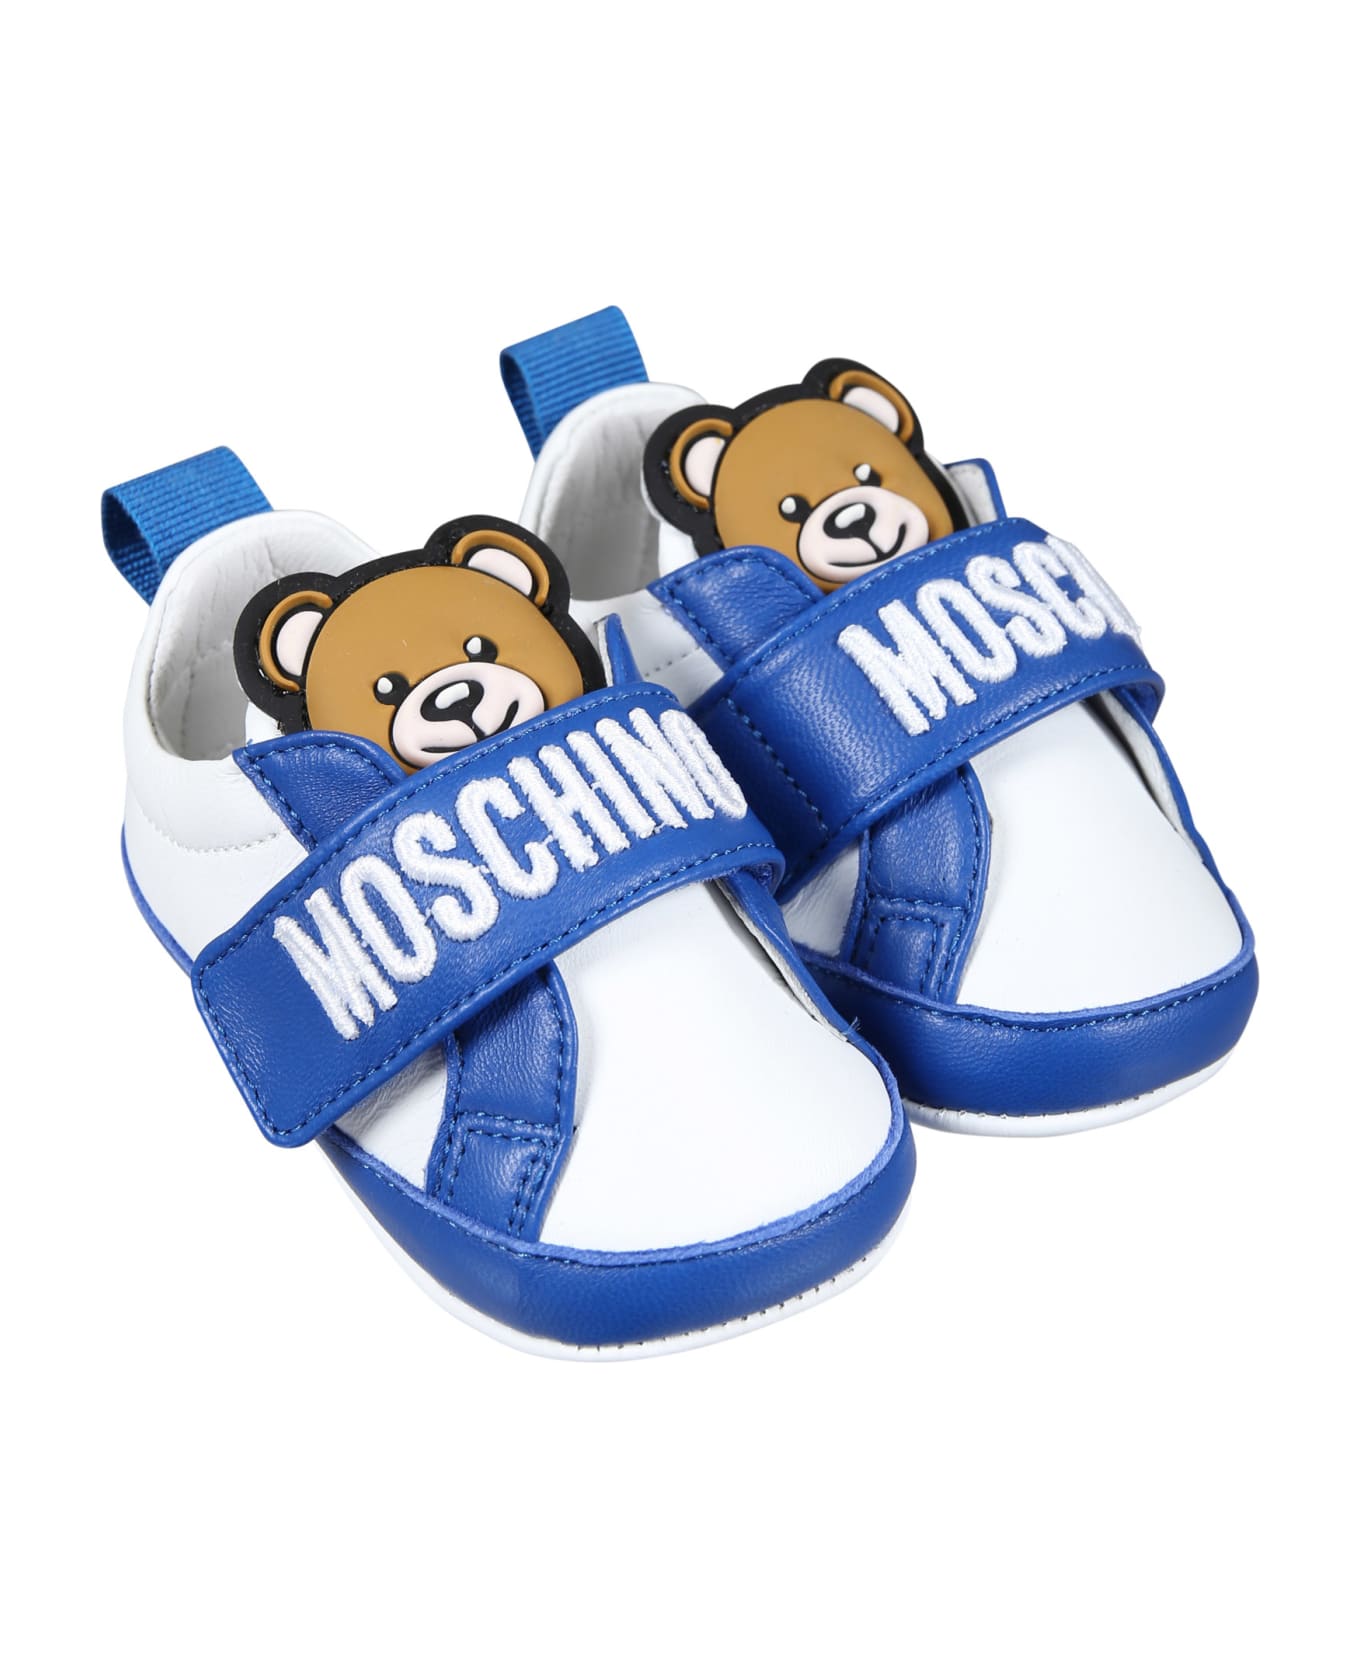 Moschino White Sneakers For Baby Boy With Teddy Bear - Light Blue シューズ